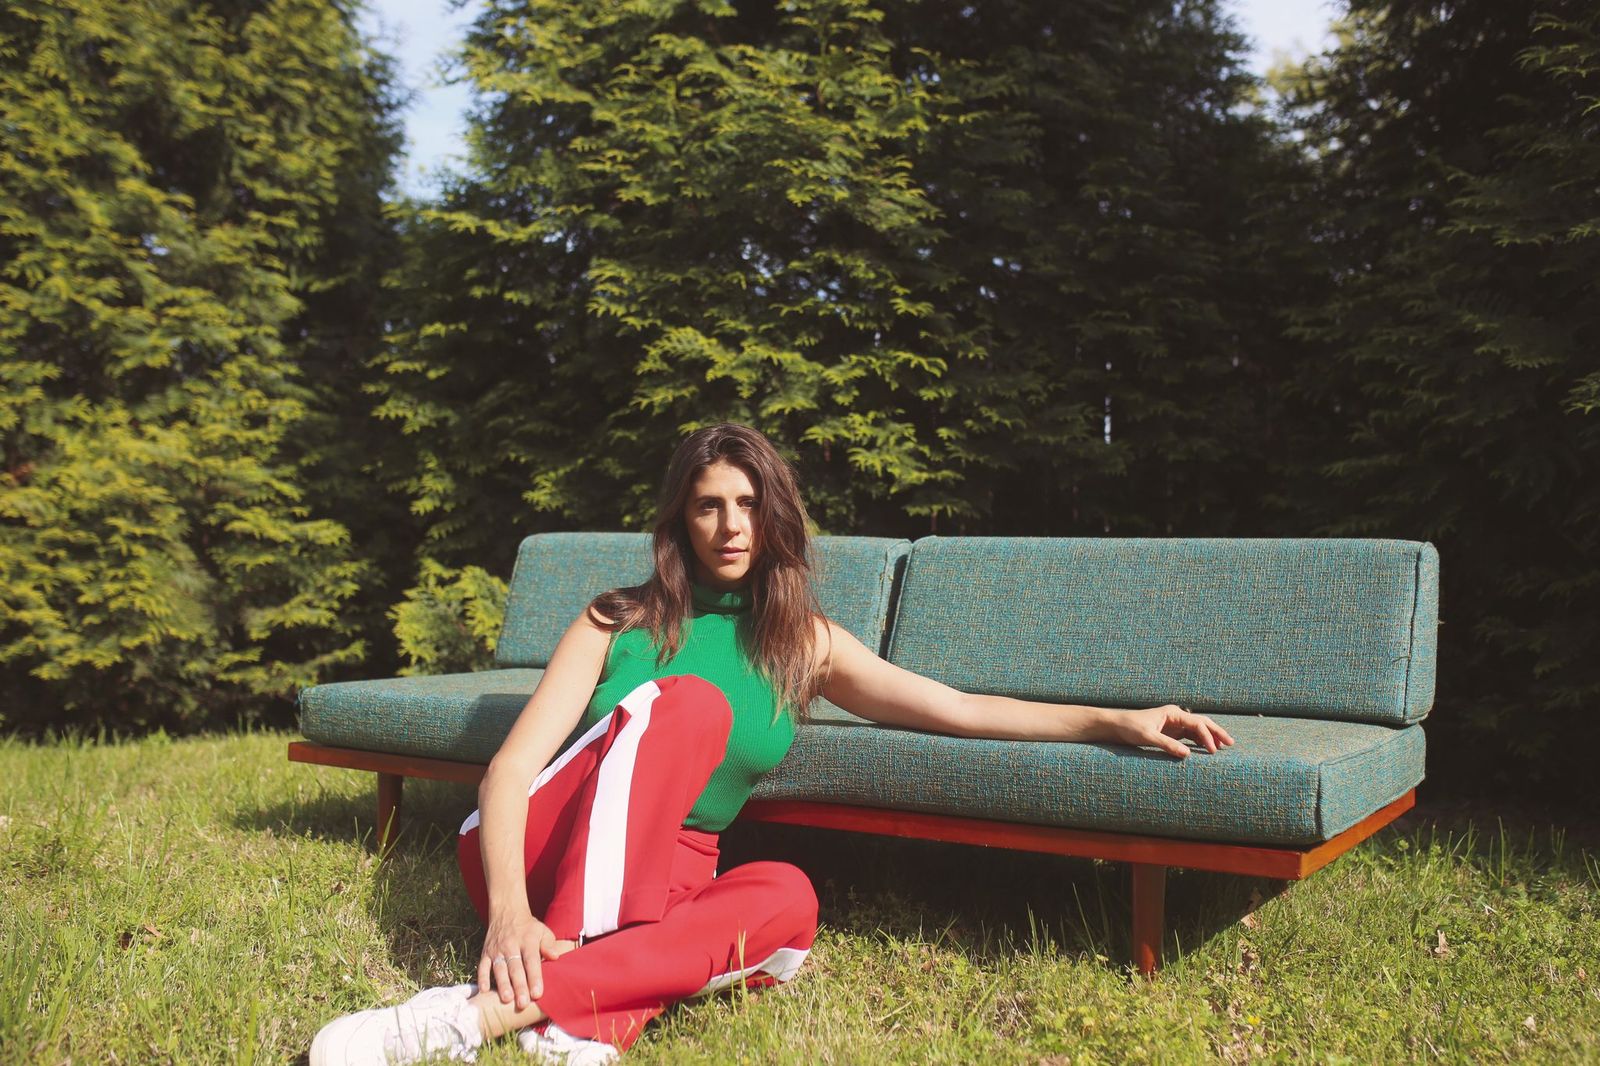 Jillette Johnson Latest “I Shouldn’t Go Anywhere” Shows Personal, Musical Transformation